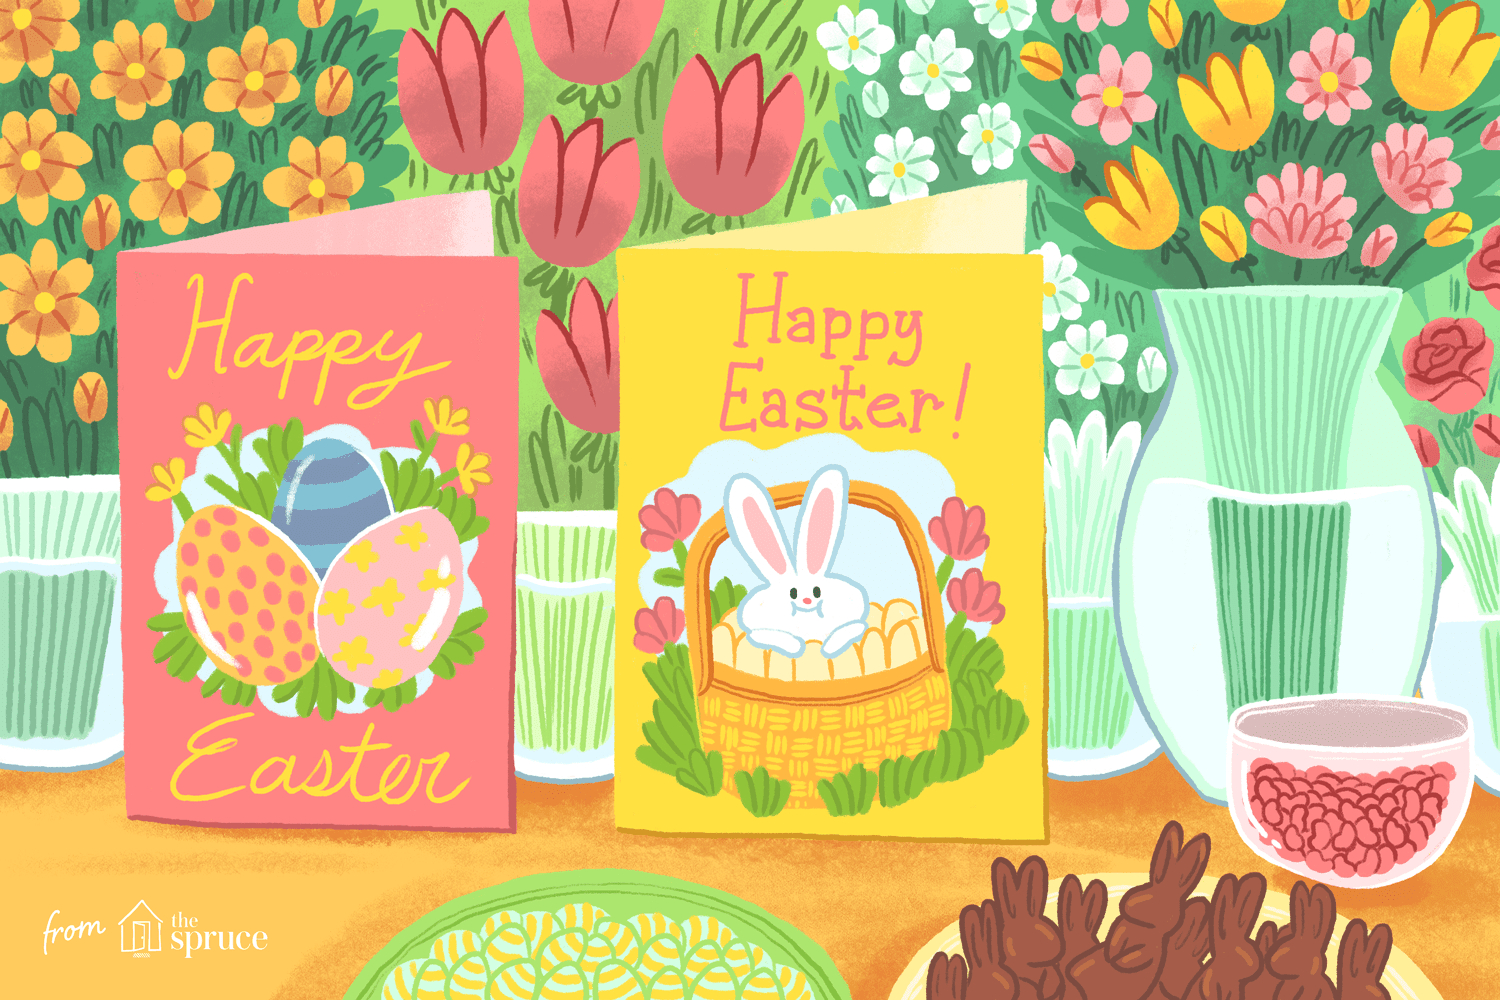 12 Free, Printable Easter Cards For Everyone You Know - Printable Easter Greeting Cards Free